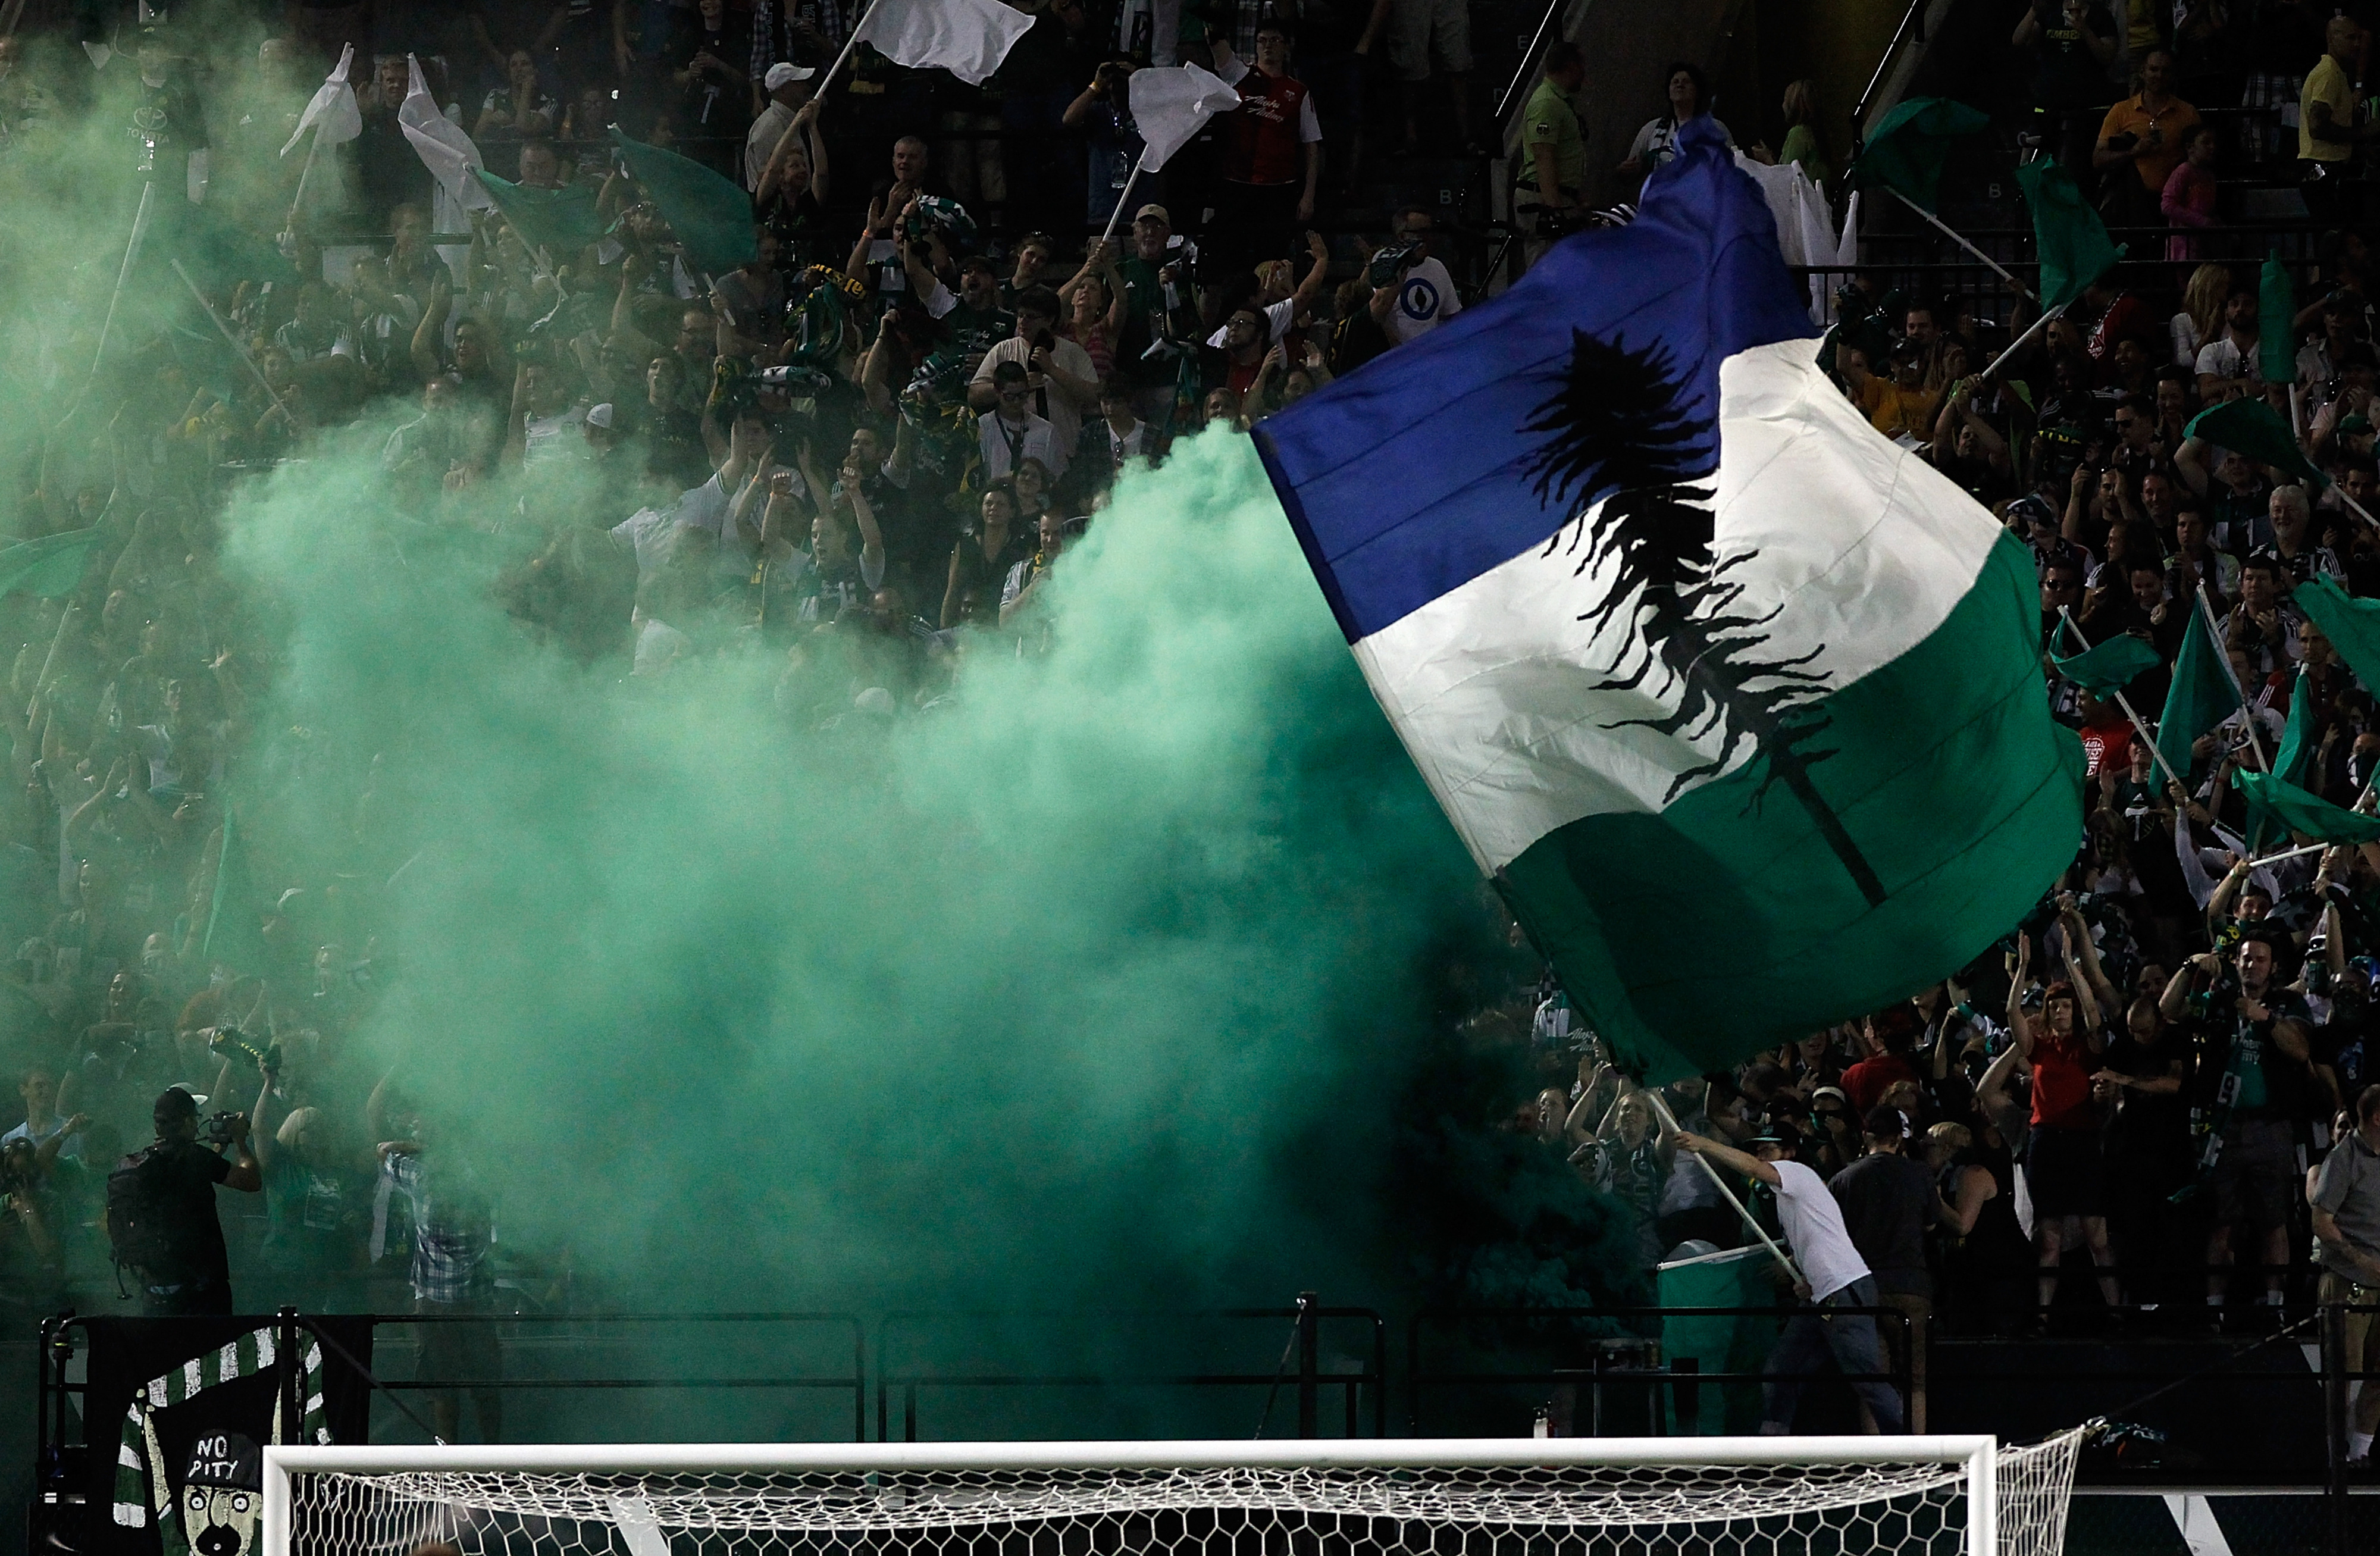 PORTLAND, OR - AUGUST 25: Fans of the Portland Timbers celebrate a goal against the Vancouver Whitecaps on August 25, 2012 at Jeld-Wen Field in Portland, Oregon. (Photo by Jonathan Ferrey/Getty Images)